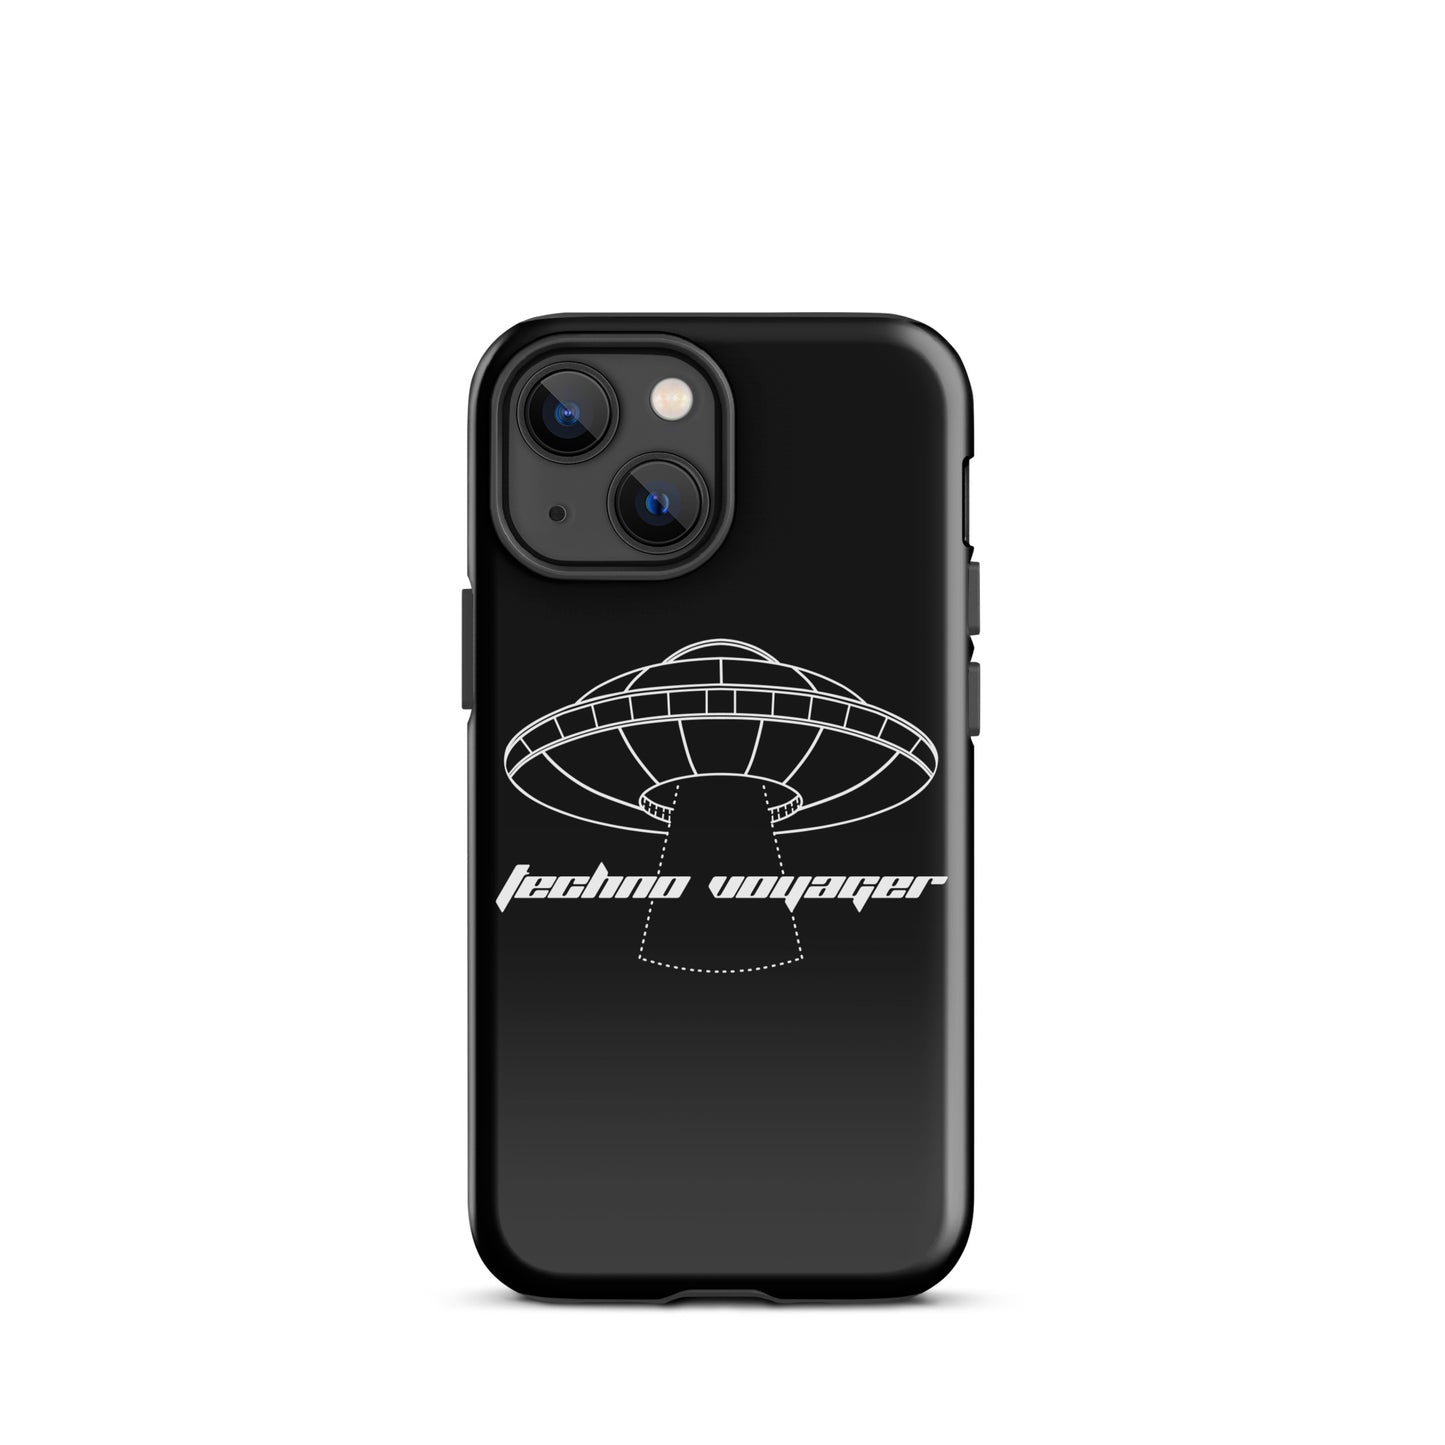 The 'OG-TECHNO-VOYAGER' iPhone Case